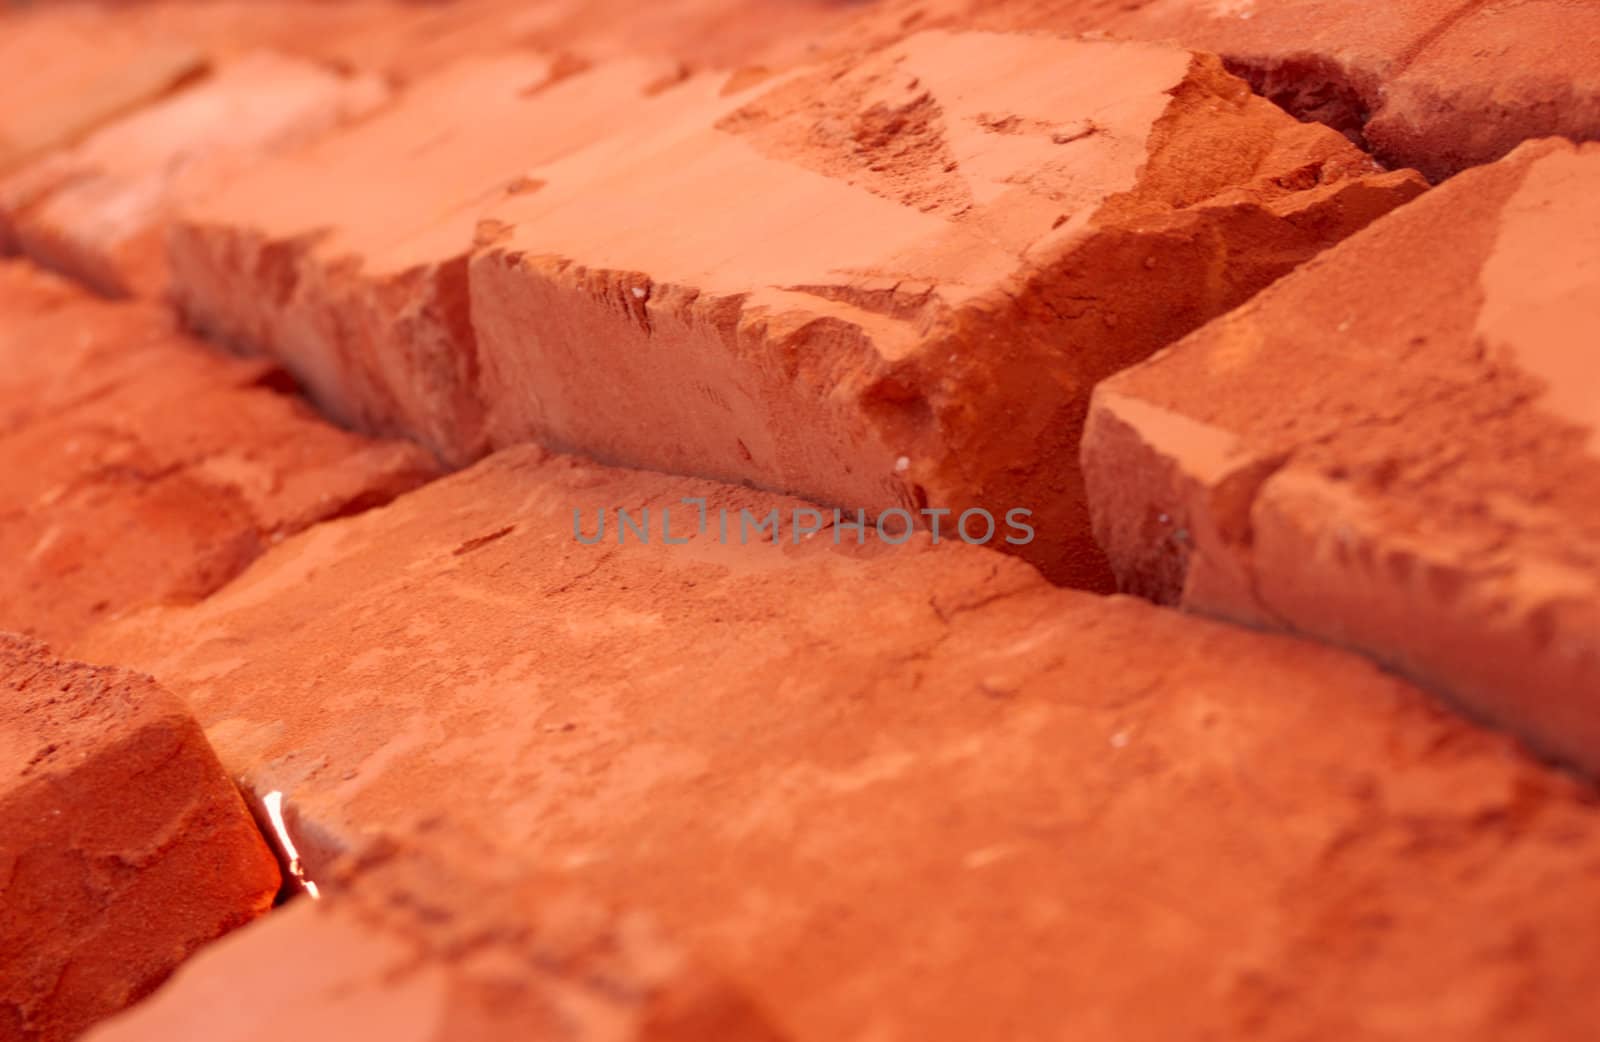 close-up of baked bricks with red surface